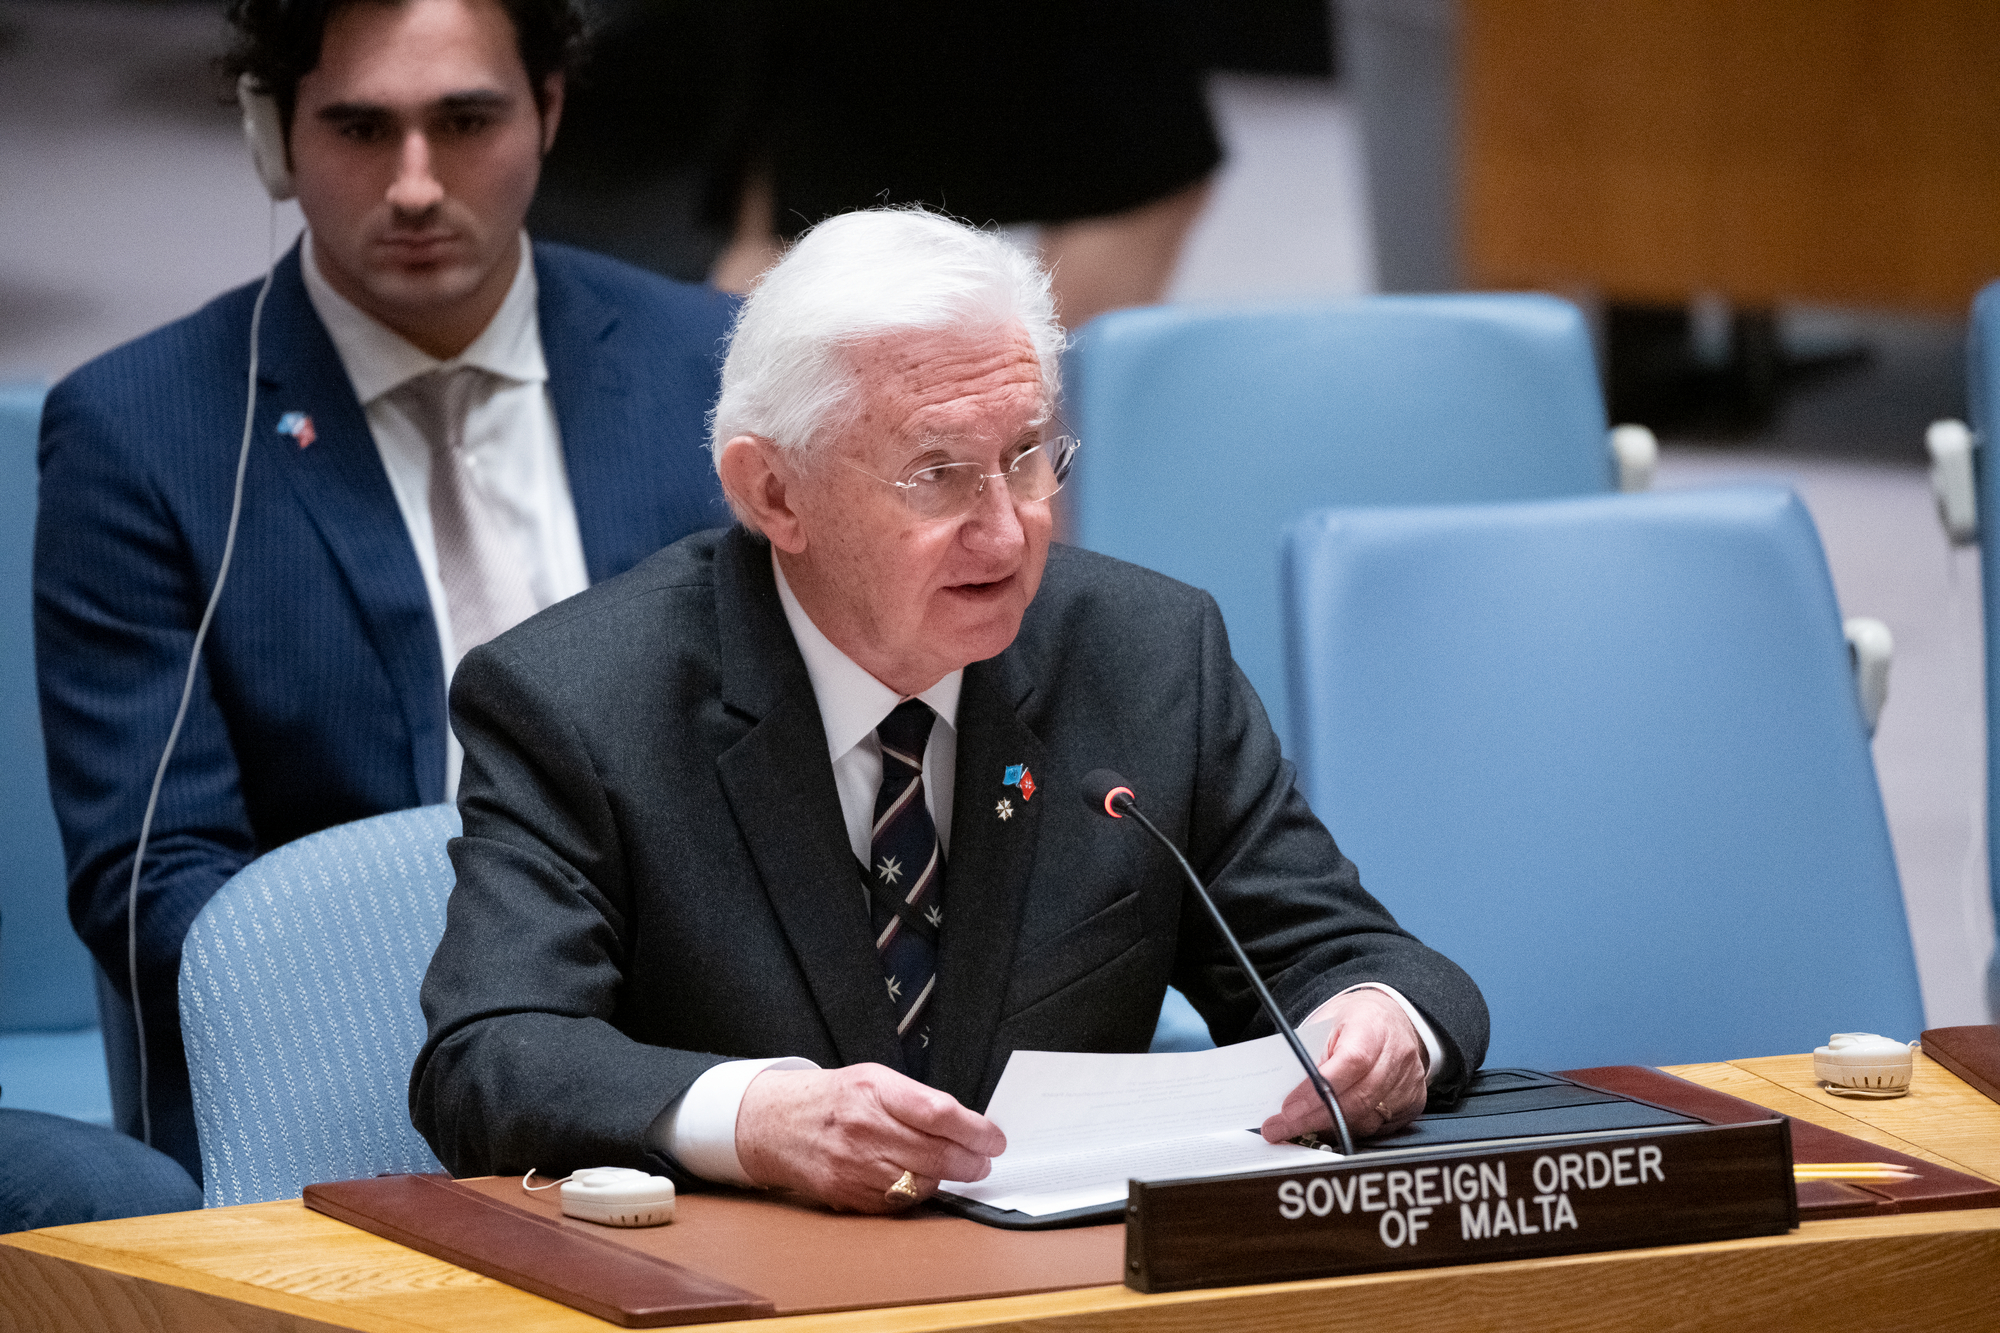 H.E. Dr. Ambassador Beresford-Hill addressed the Security Council Concerning the Vulnerability of Conflict Afflicted Communities to Human Traffickers